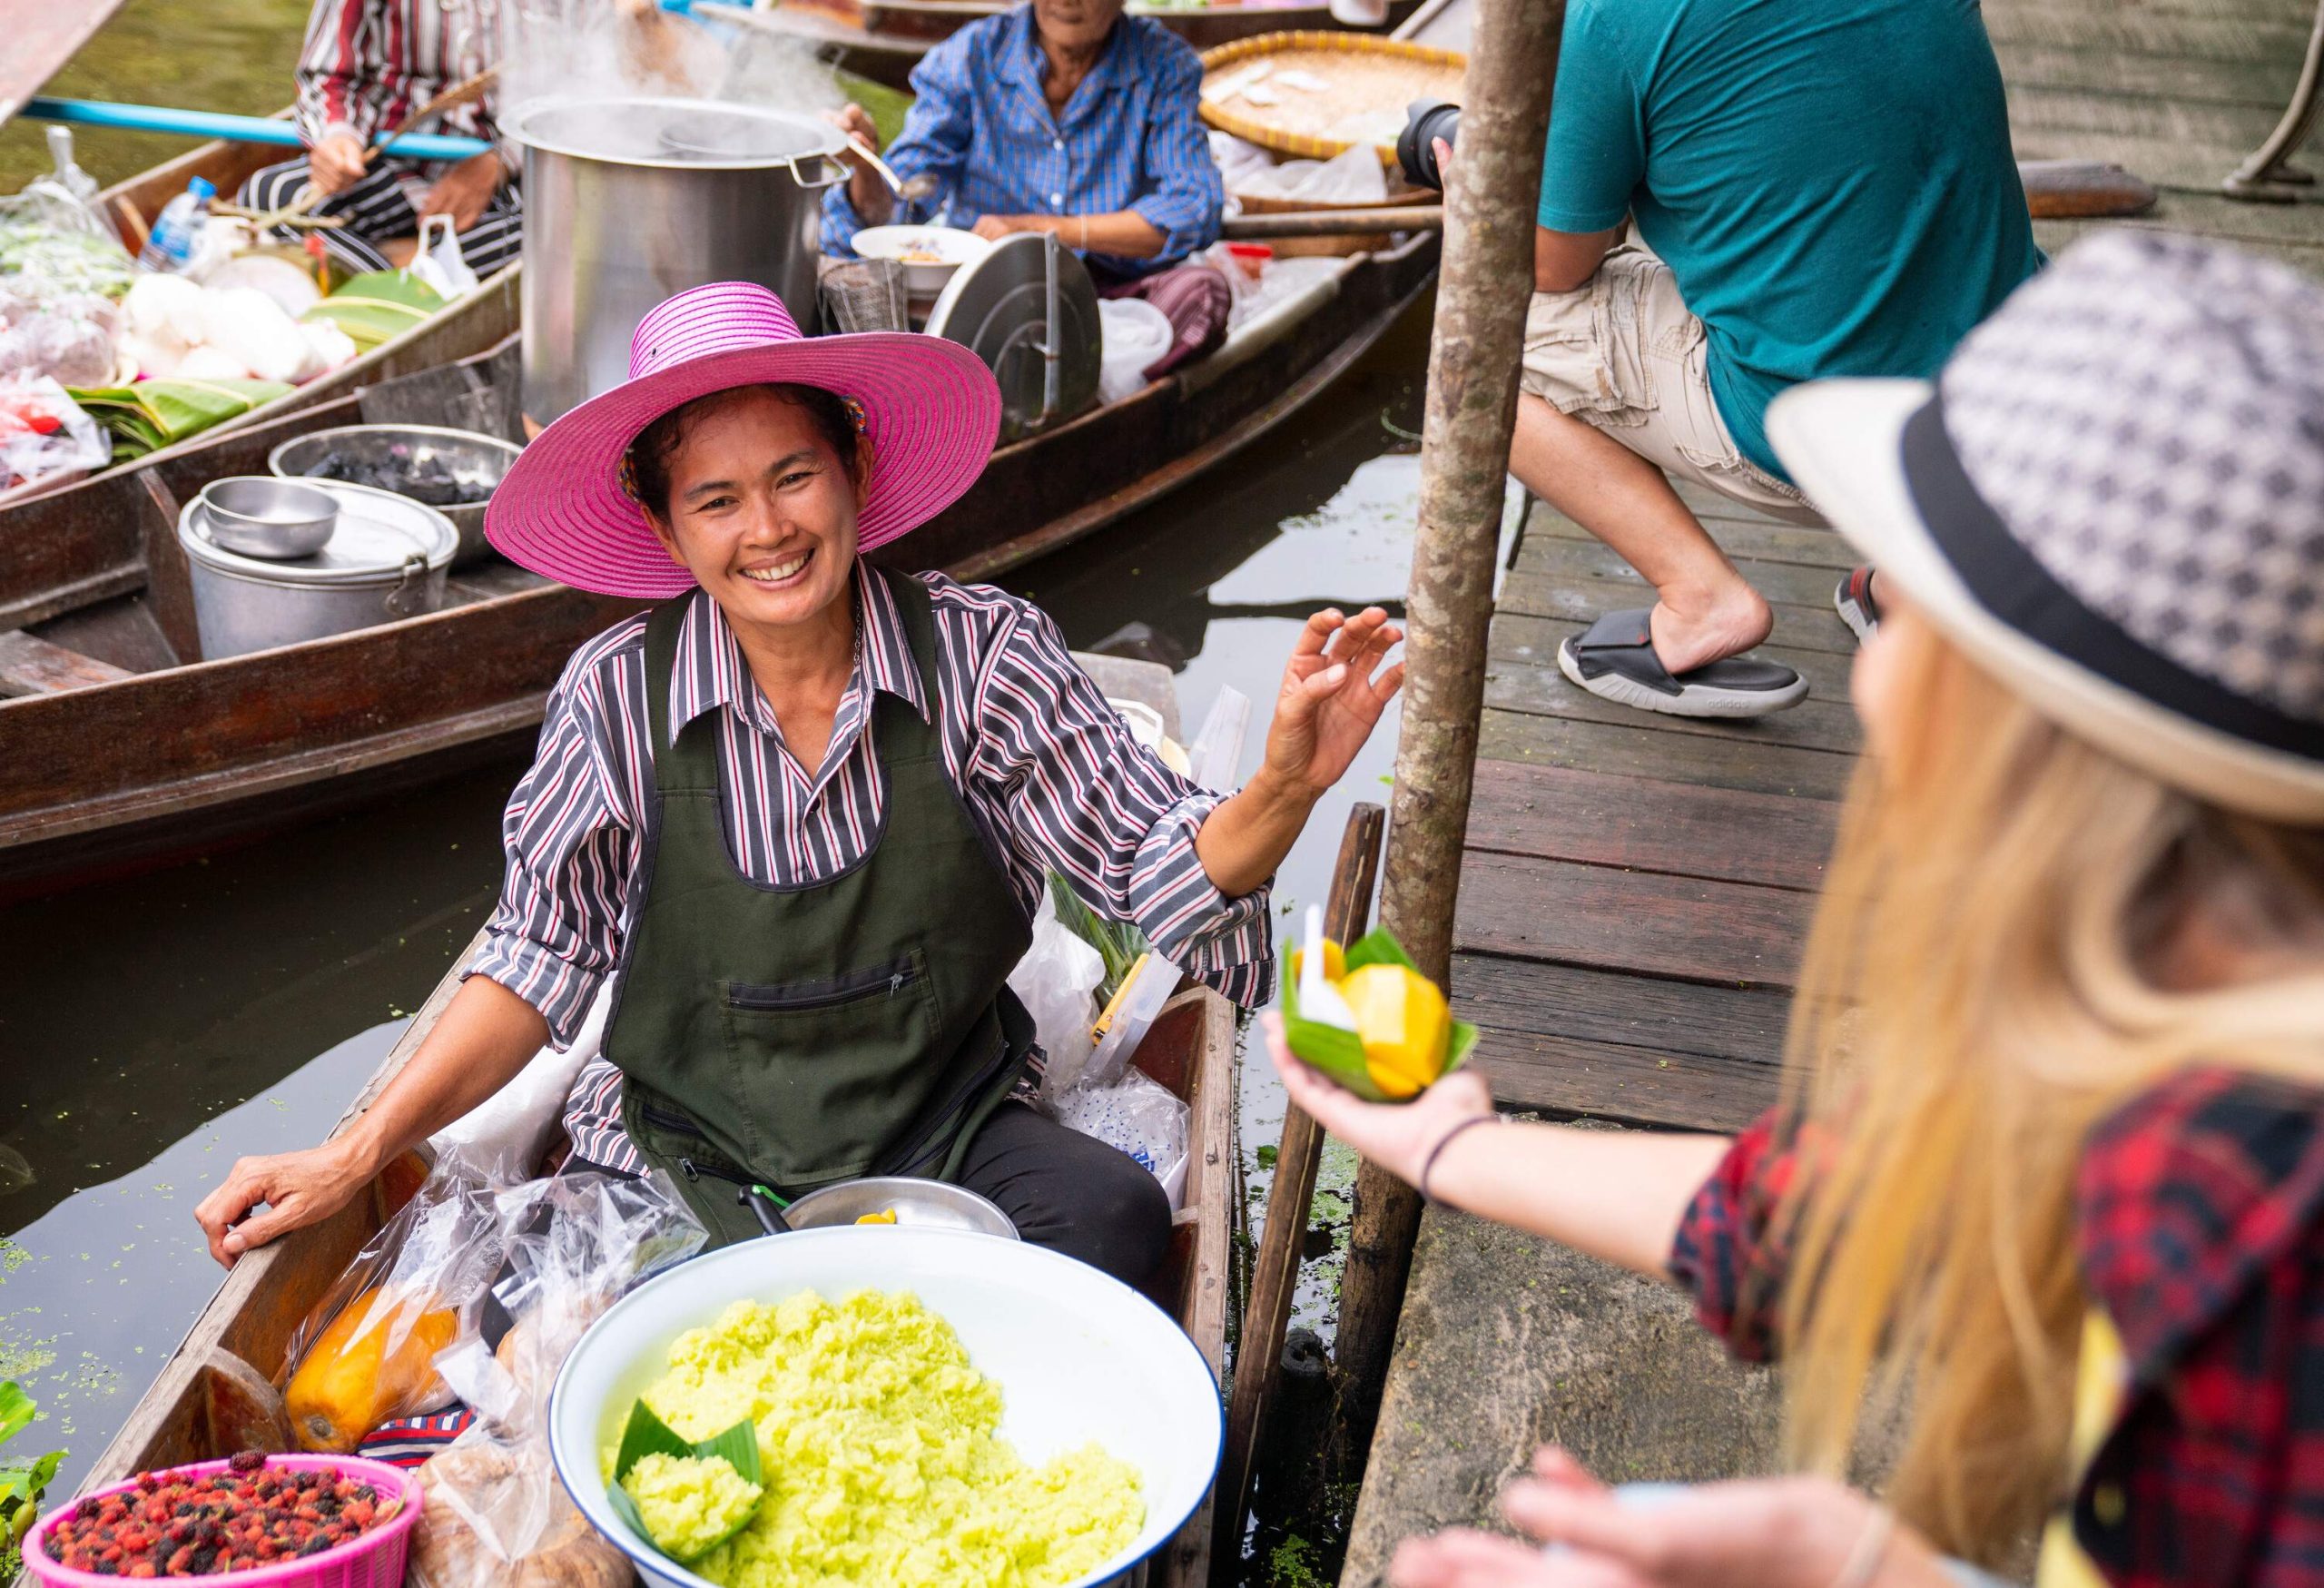 A tourist extends her hand with snacks to a smiling vendor wearing a wide-brimmed hat on a boat in a floating market.